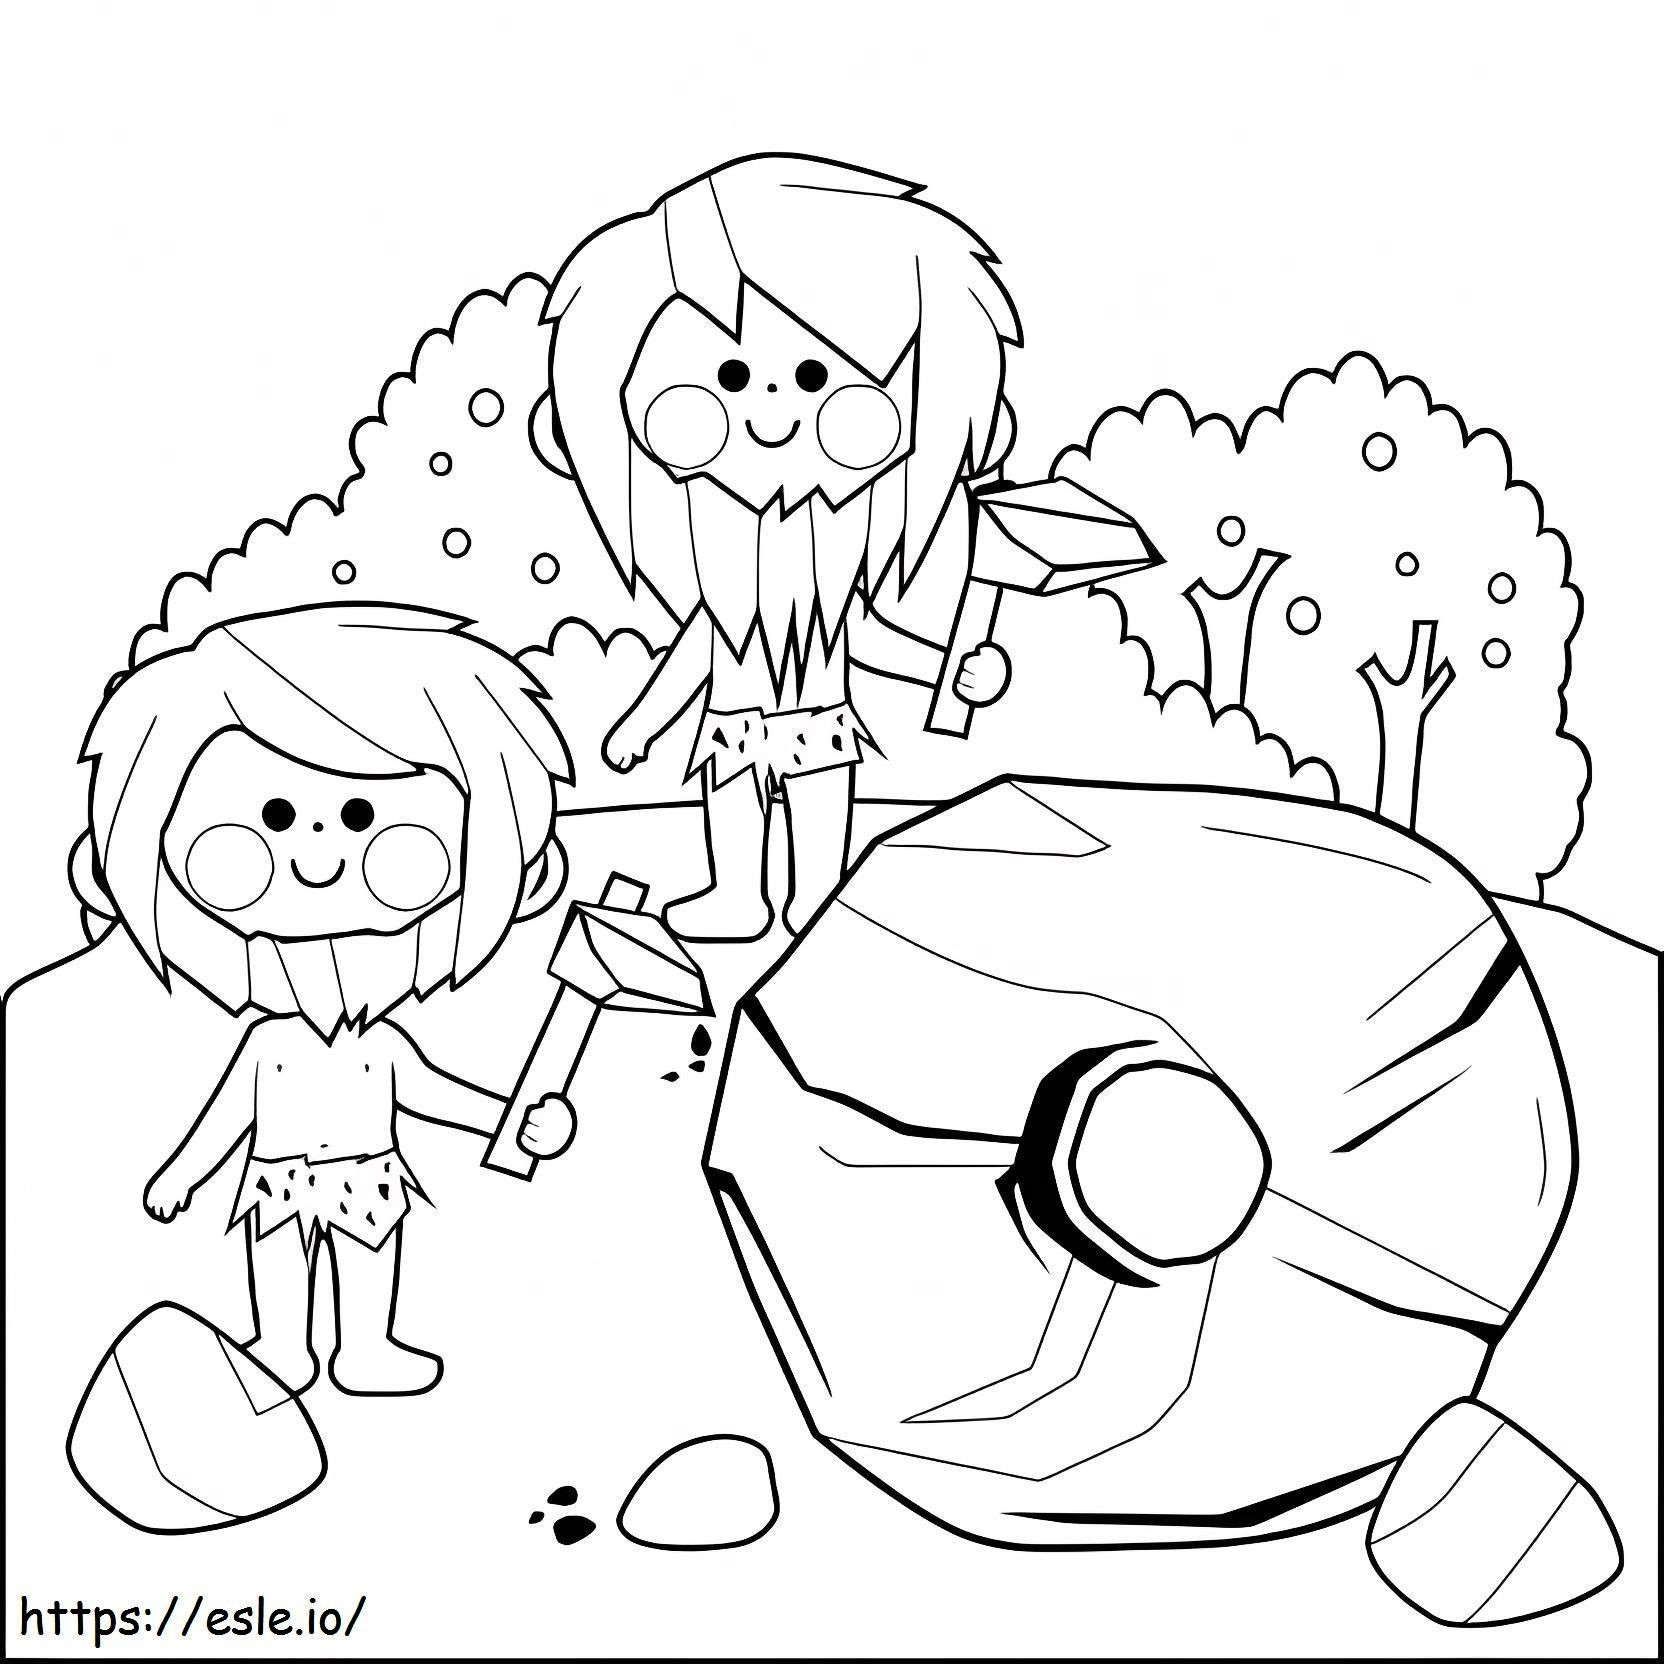 Stone Age People Smiling coloring page